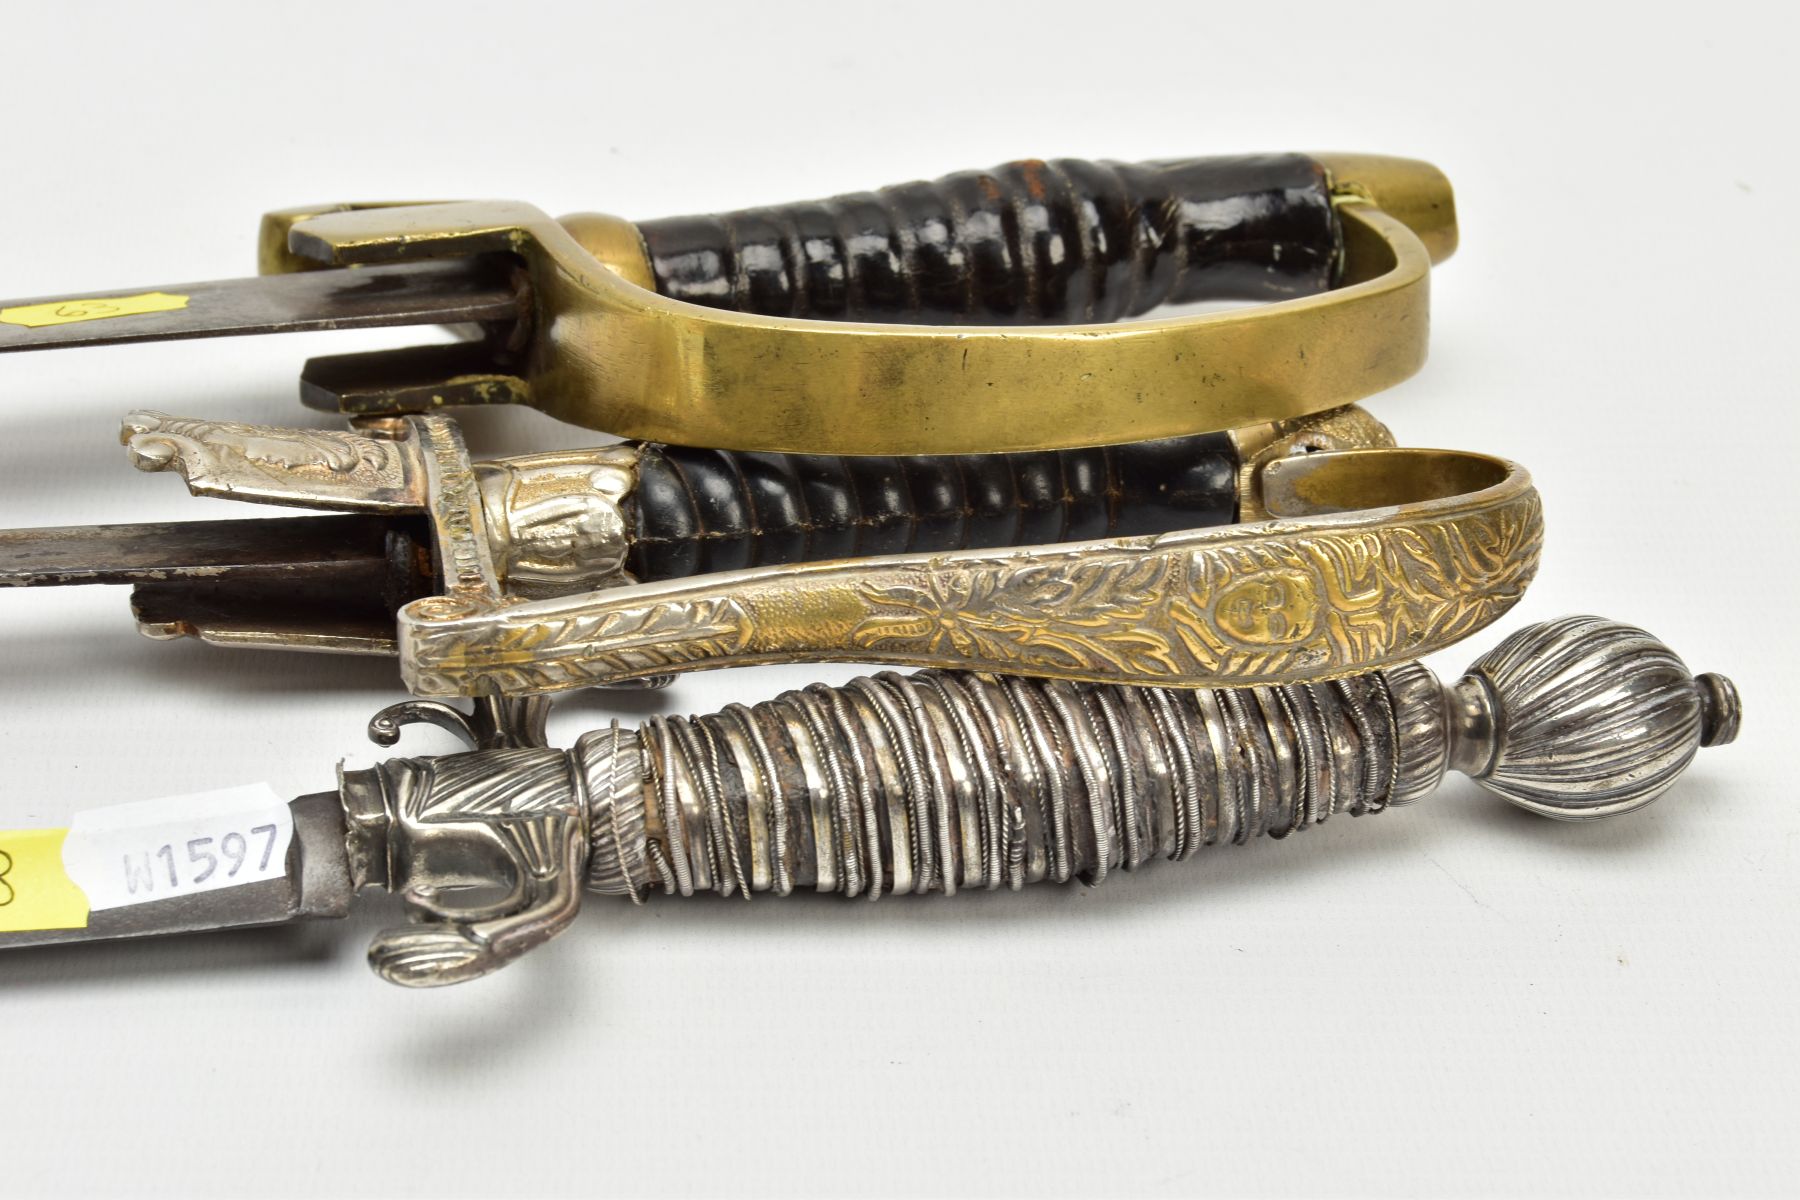 THREE SWORDS BELIEVED 19TH Century, a white metal ornate grip and cross guard blade tip broken, - Image 12 of 12